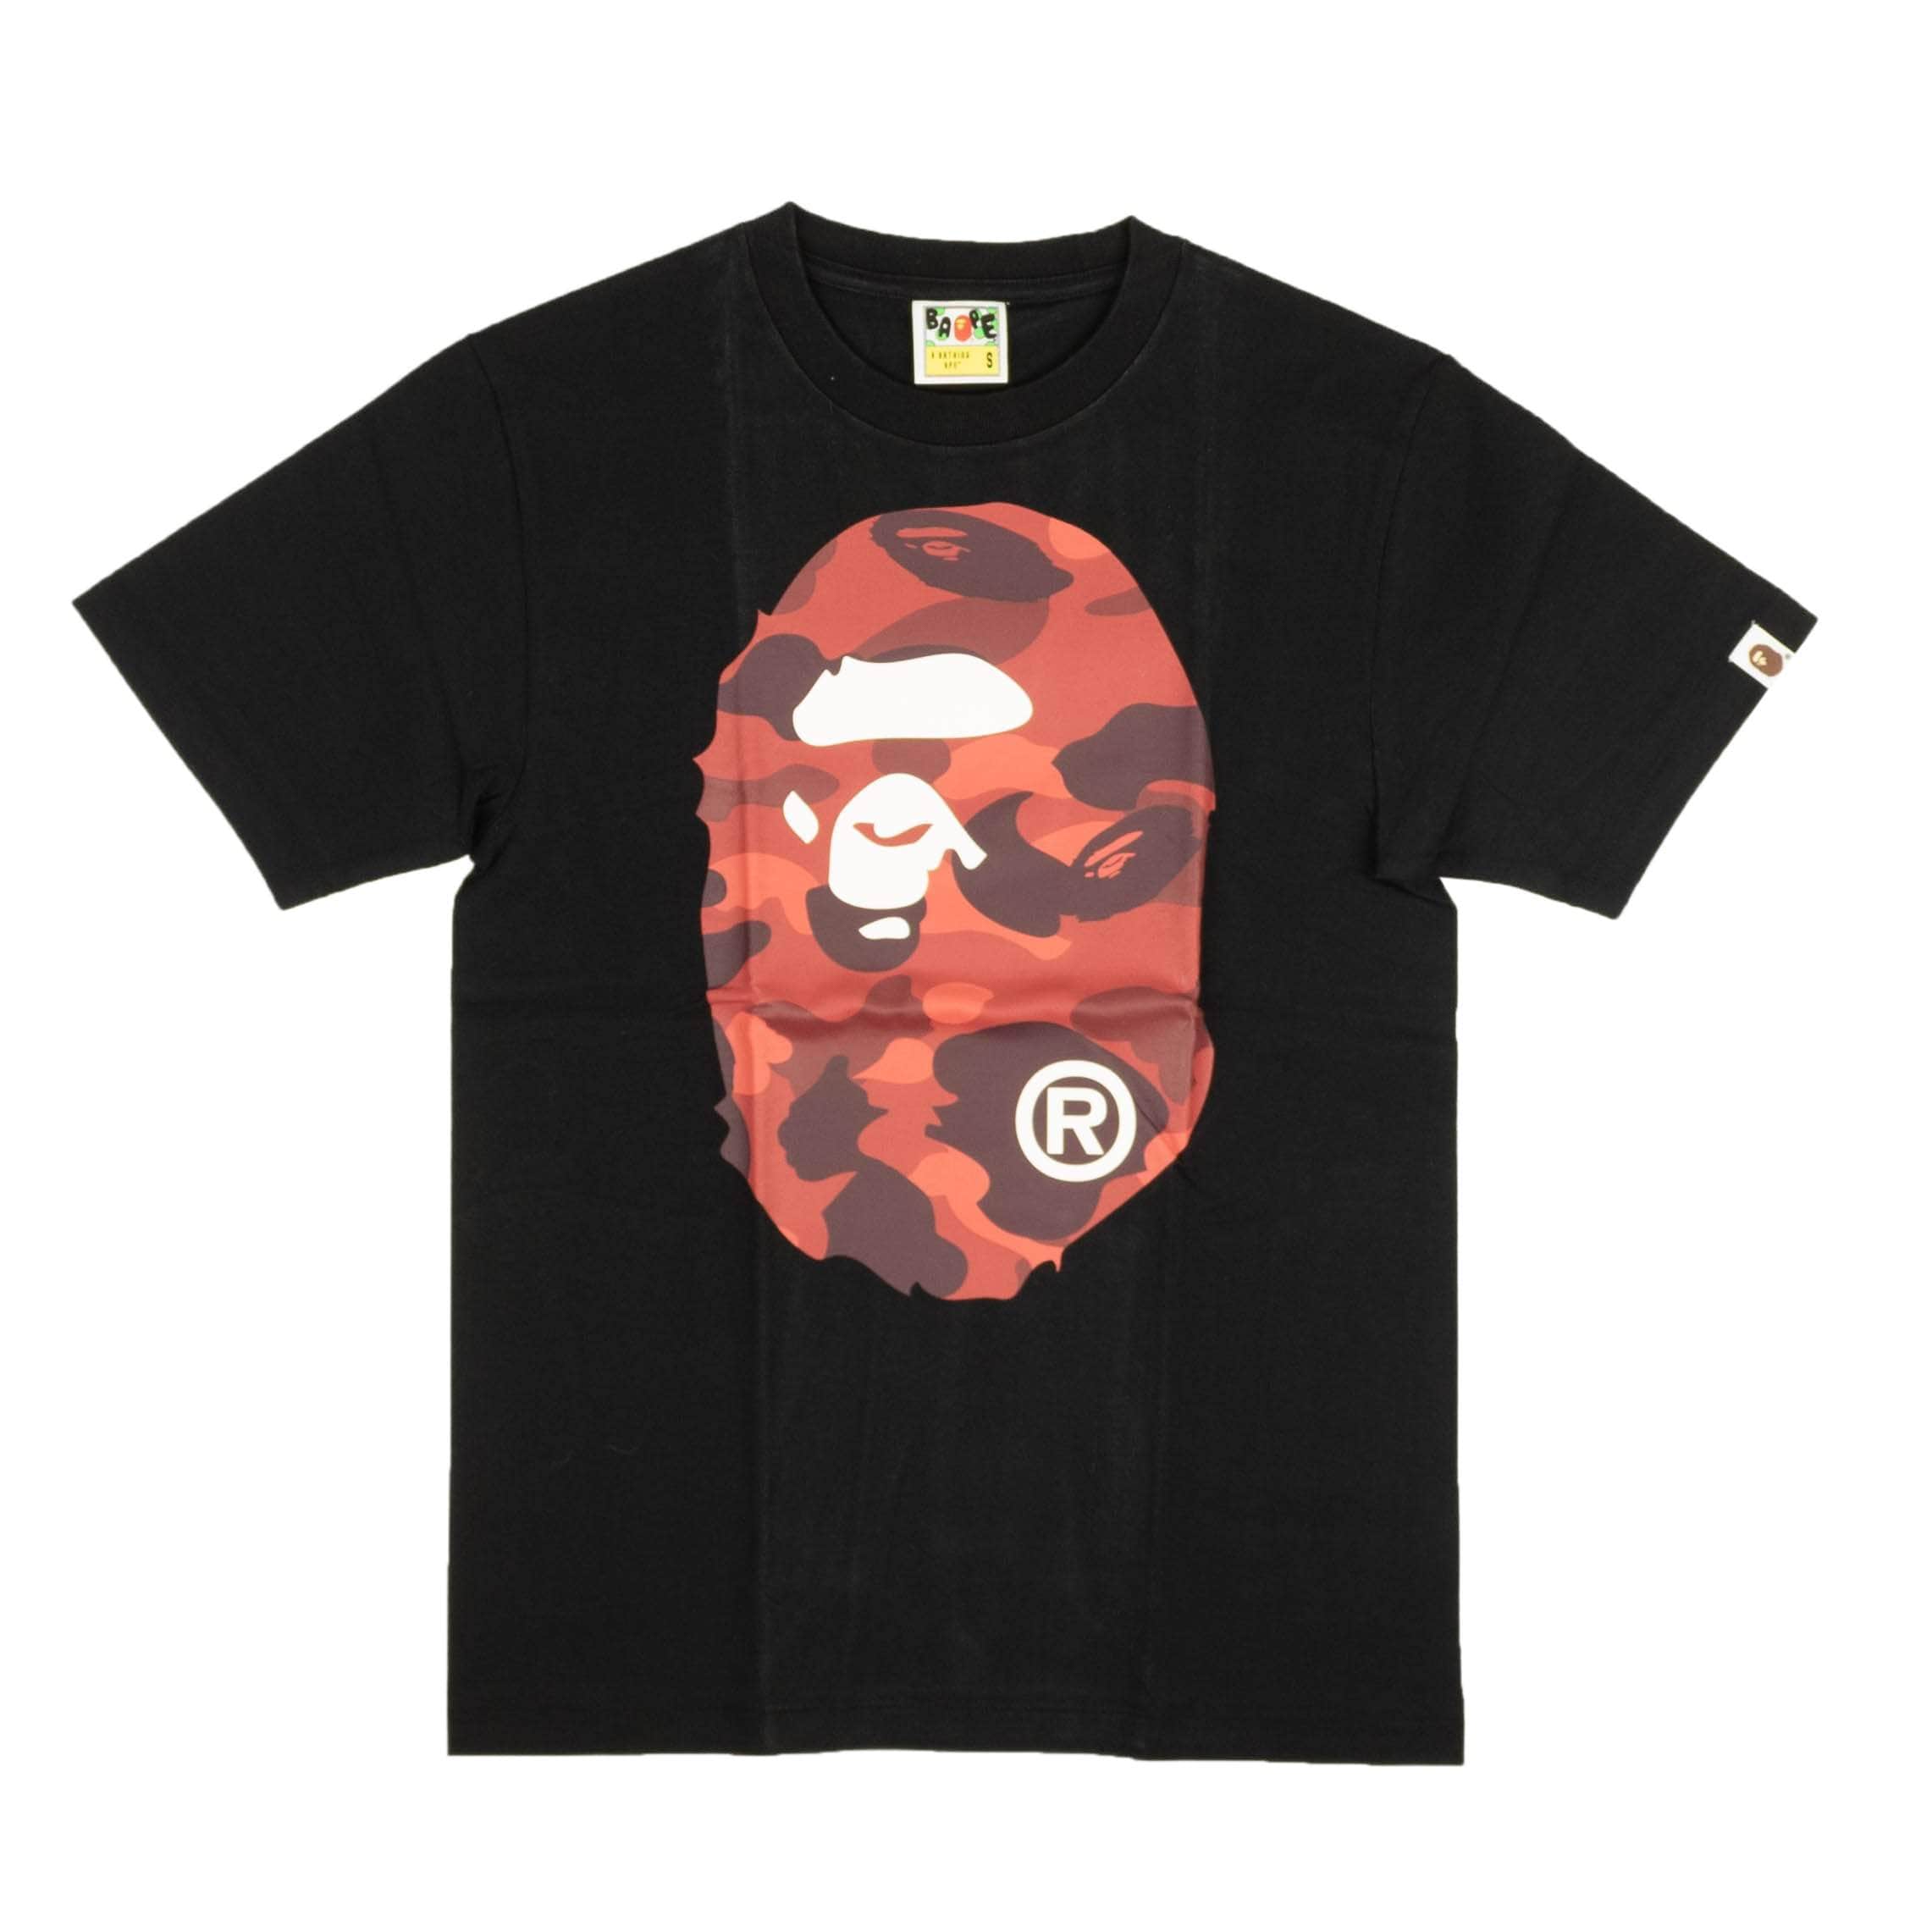 Bape bape, channelenable-all, chicmi, couponcollection, gender-mens, main-clothing, mens-shoes, size-s, under-250 Black Red Camo Logo Short Sleeve T-Shirt